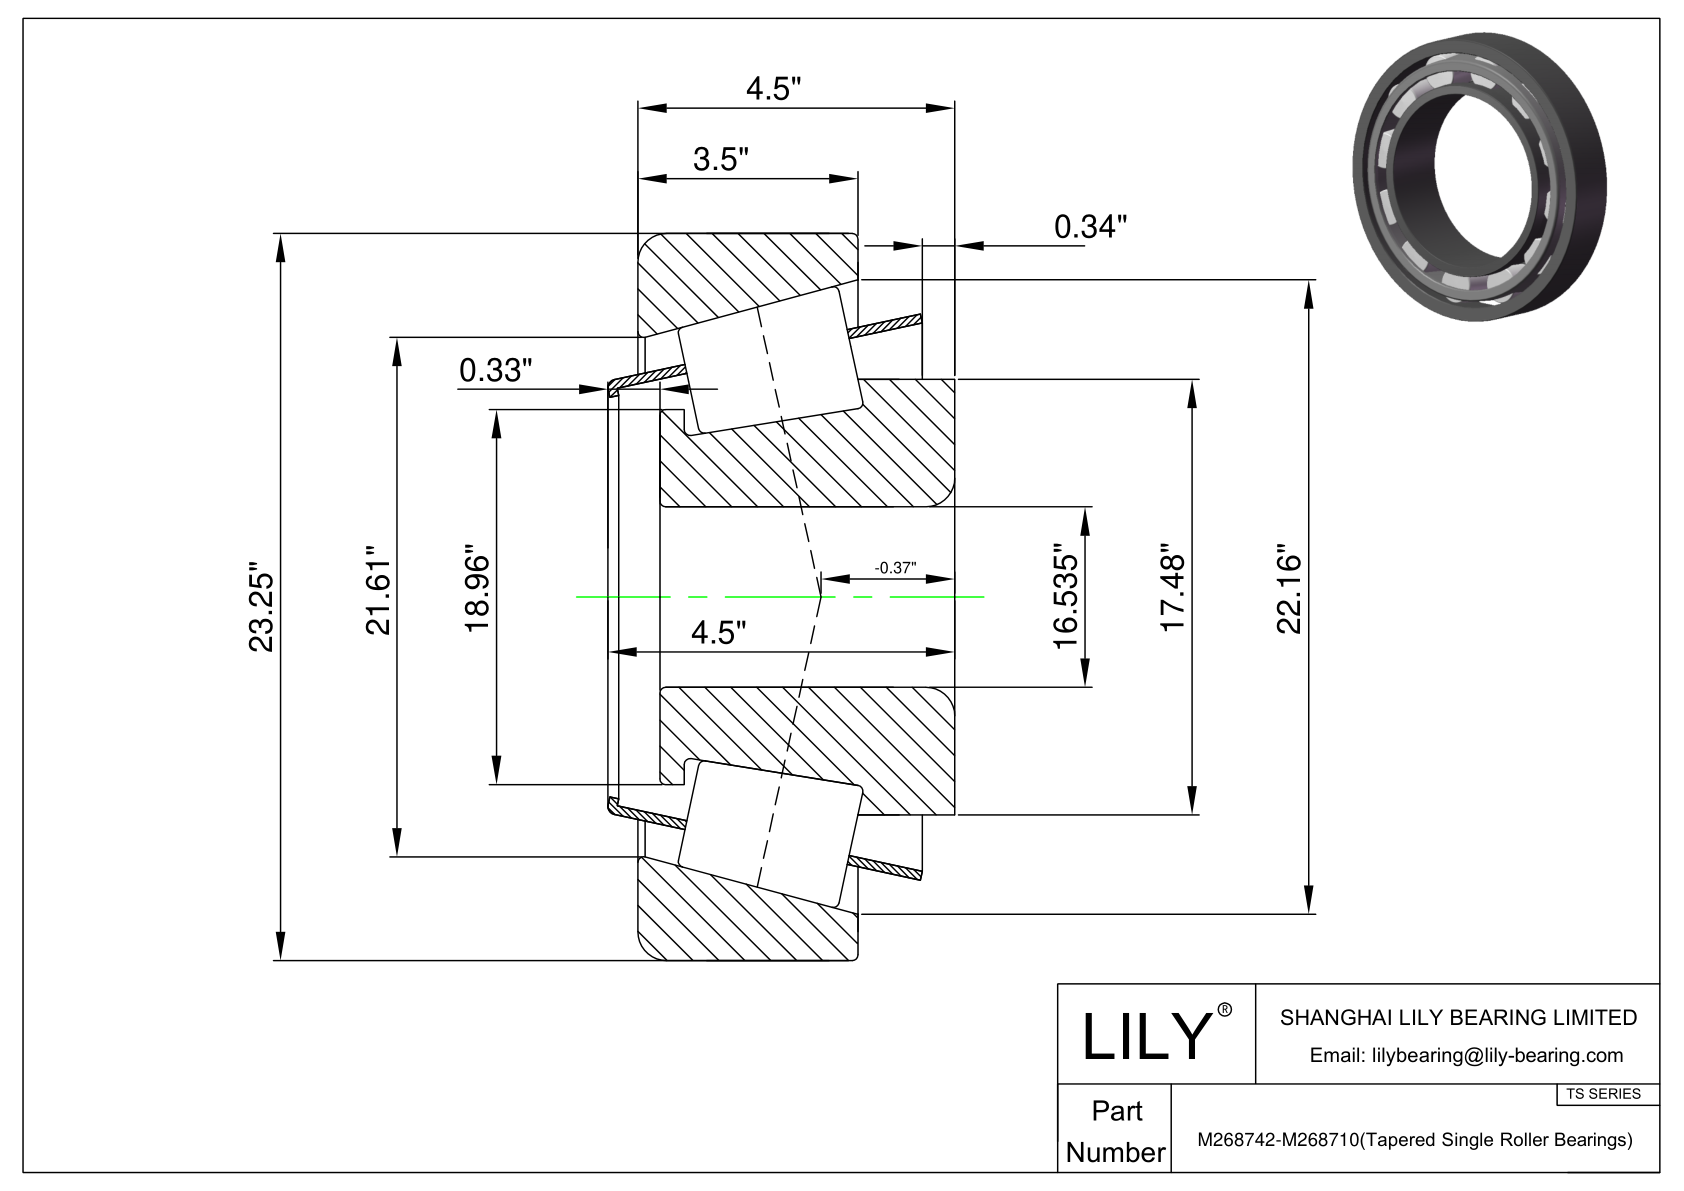 M268742-M268710 TS (Tapered Single Roller Bearings) (Imperial) cad drawing